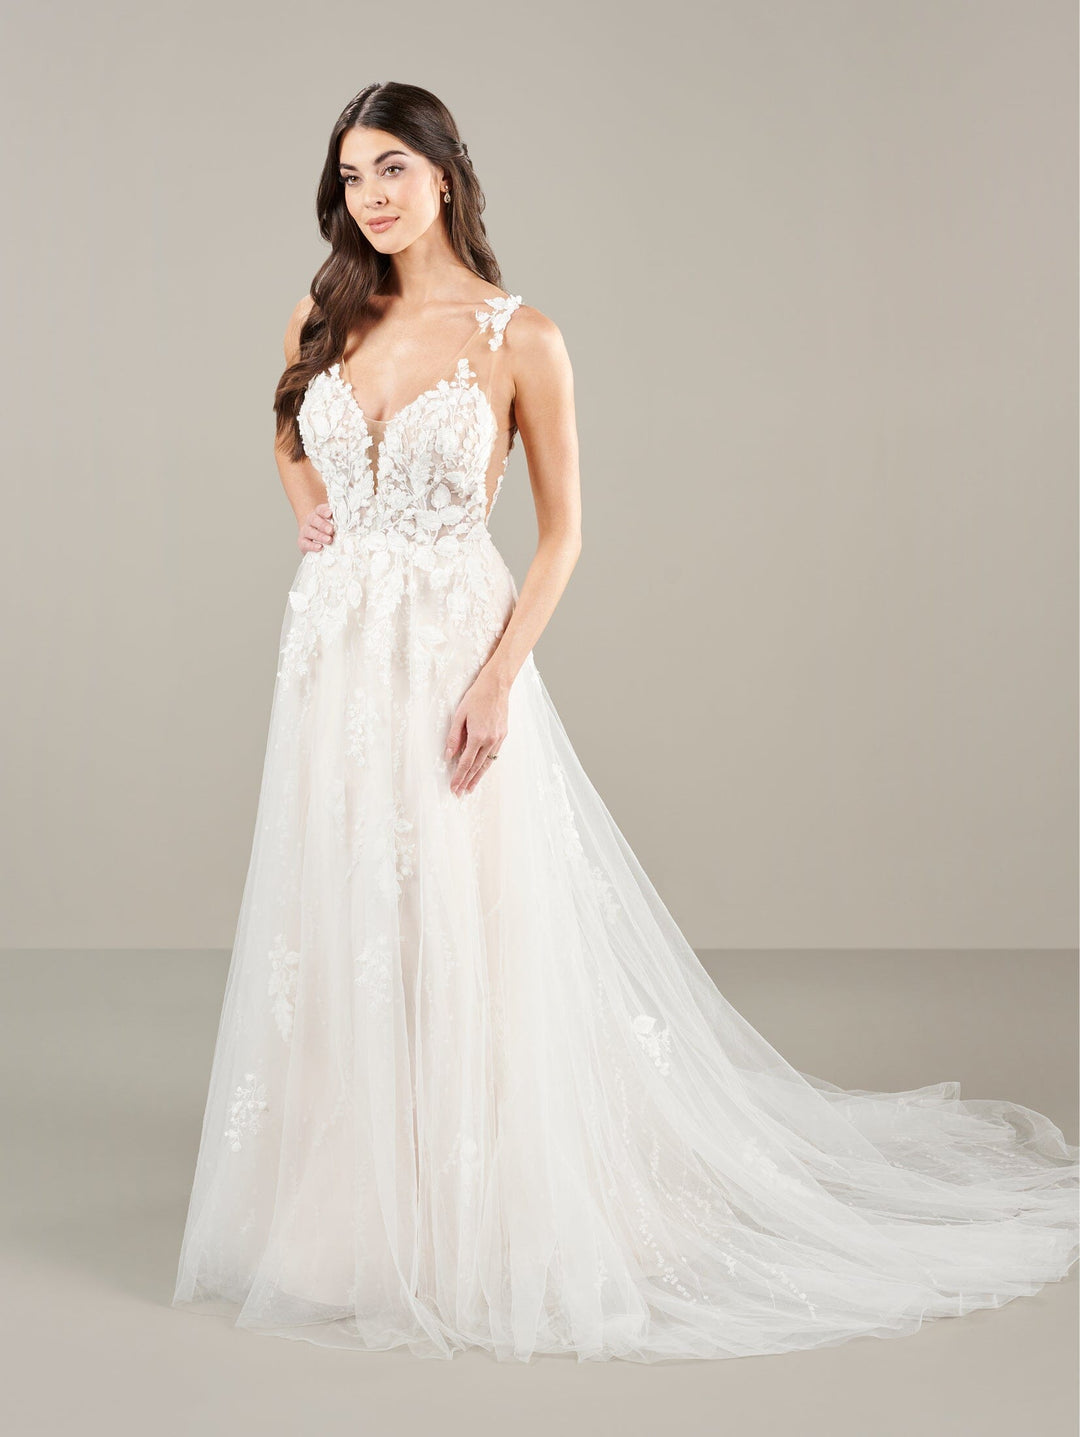 Applique Sleeveless Bridal Gown by Adrianna Papell 31274